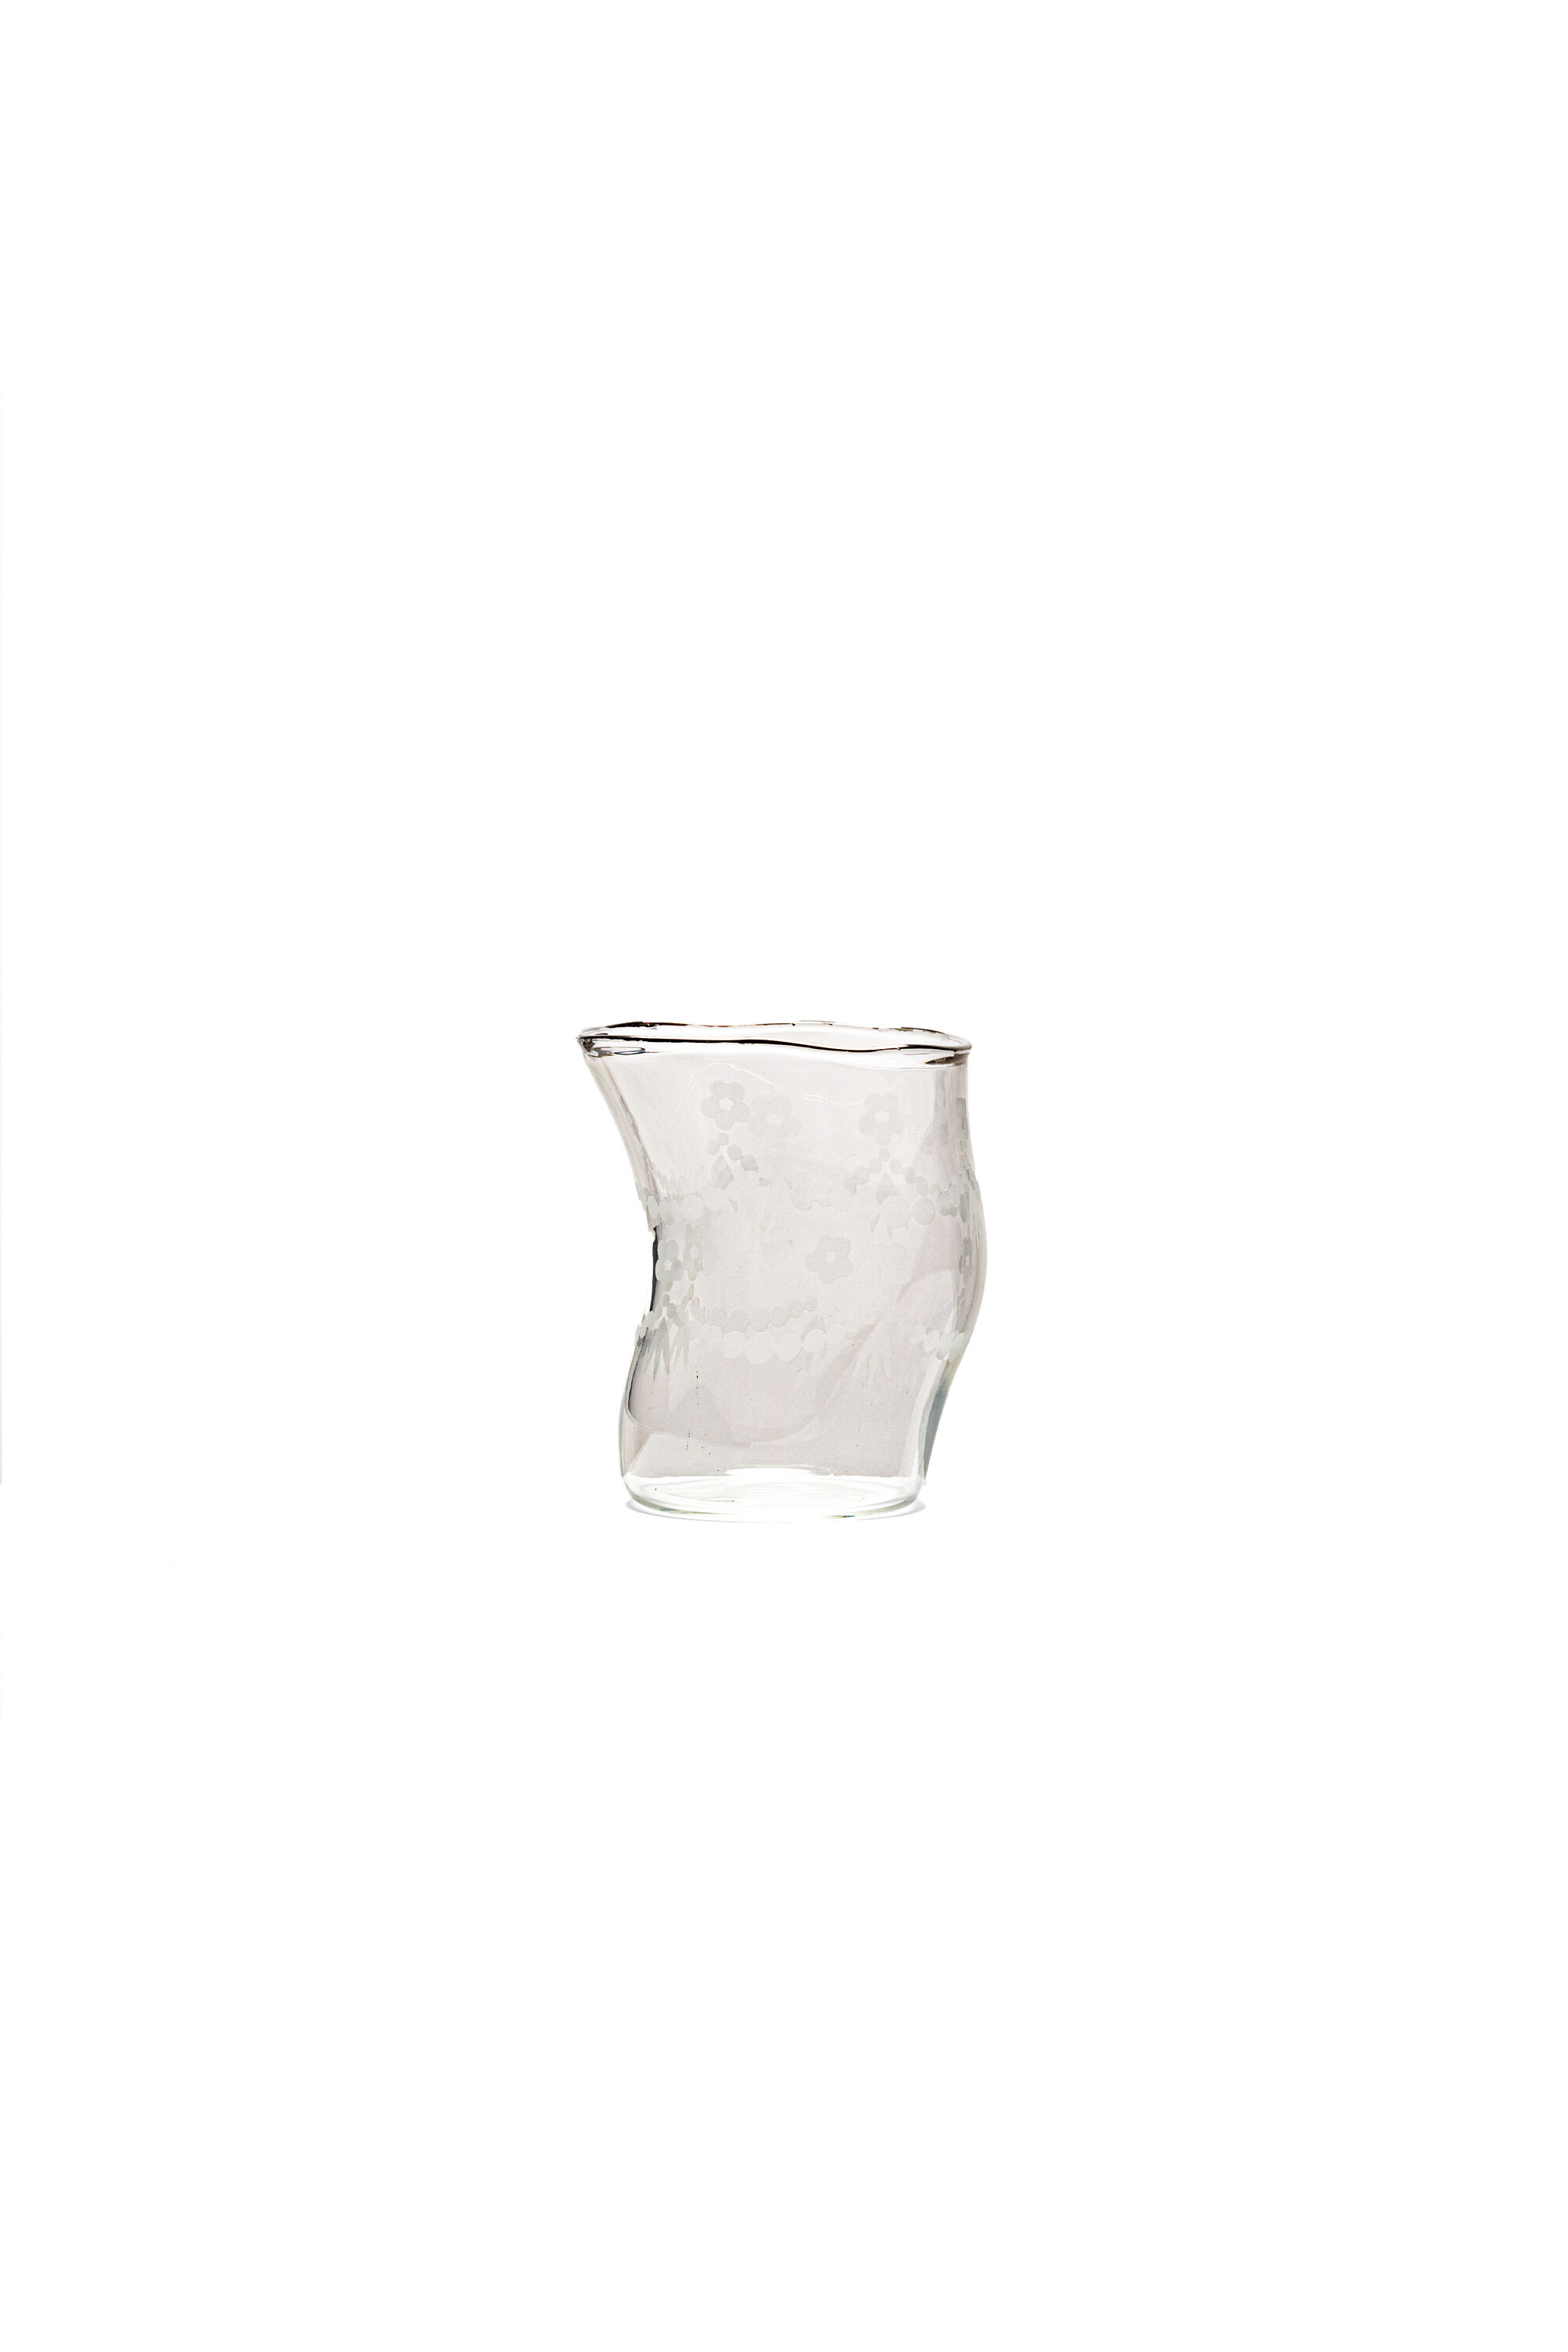 Diesel - 11242 GLASSES "CLASSIC ON ACID - SPRING", Unisex Water glass in White - Image 1